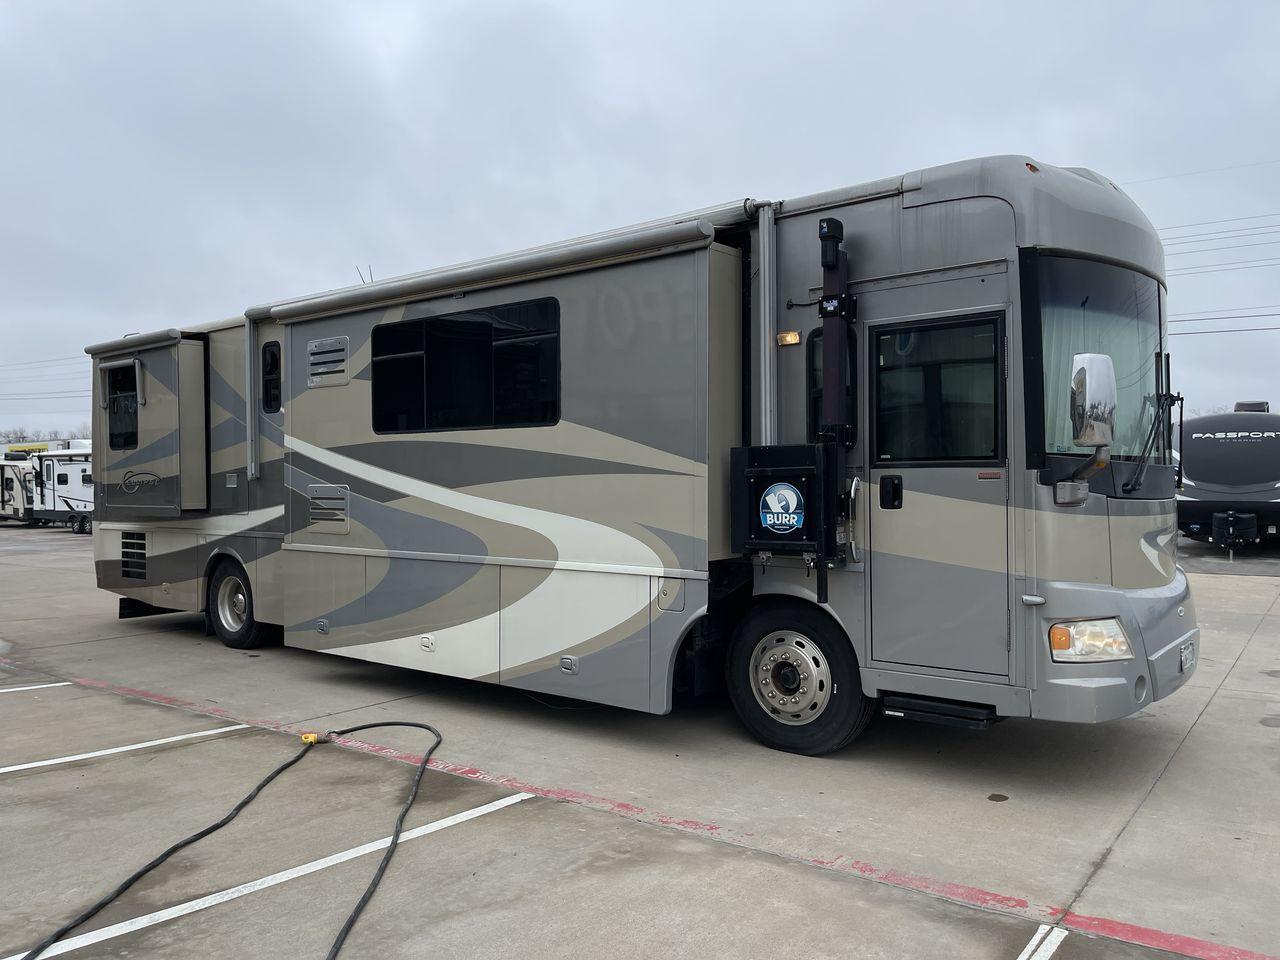 2006 BLUE ITASCA ELLIPSE 40FD - (4UZACKDC56C) , Length: 39 ft | Dry Weight: 32000 lbs | Gross Weight: 42000 lbs transmission, located at 4319 N Main Street, Cleburne, TX, 76033, (817) 221-0660, 32.435829, -97.384178 - Here is the 2006 Itasca Ellipse 40FD, a top-of-the-line Class A motorhome designed for road trippers who want the ultimate in comfort and style. It is 39 feet long and weighs 32,000 pounds dry. The inside is very roomy and comfortable, making it perfect for long trips. The gross weight of this RV is - Photo #28